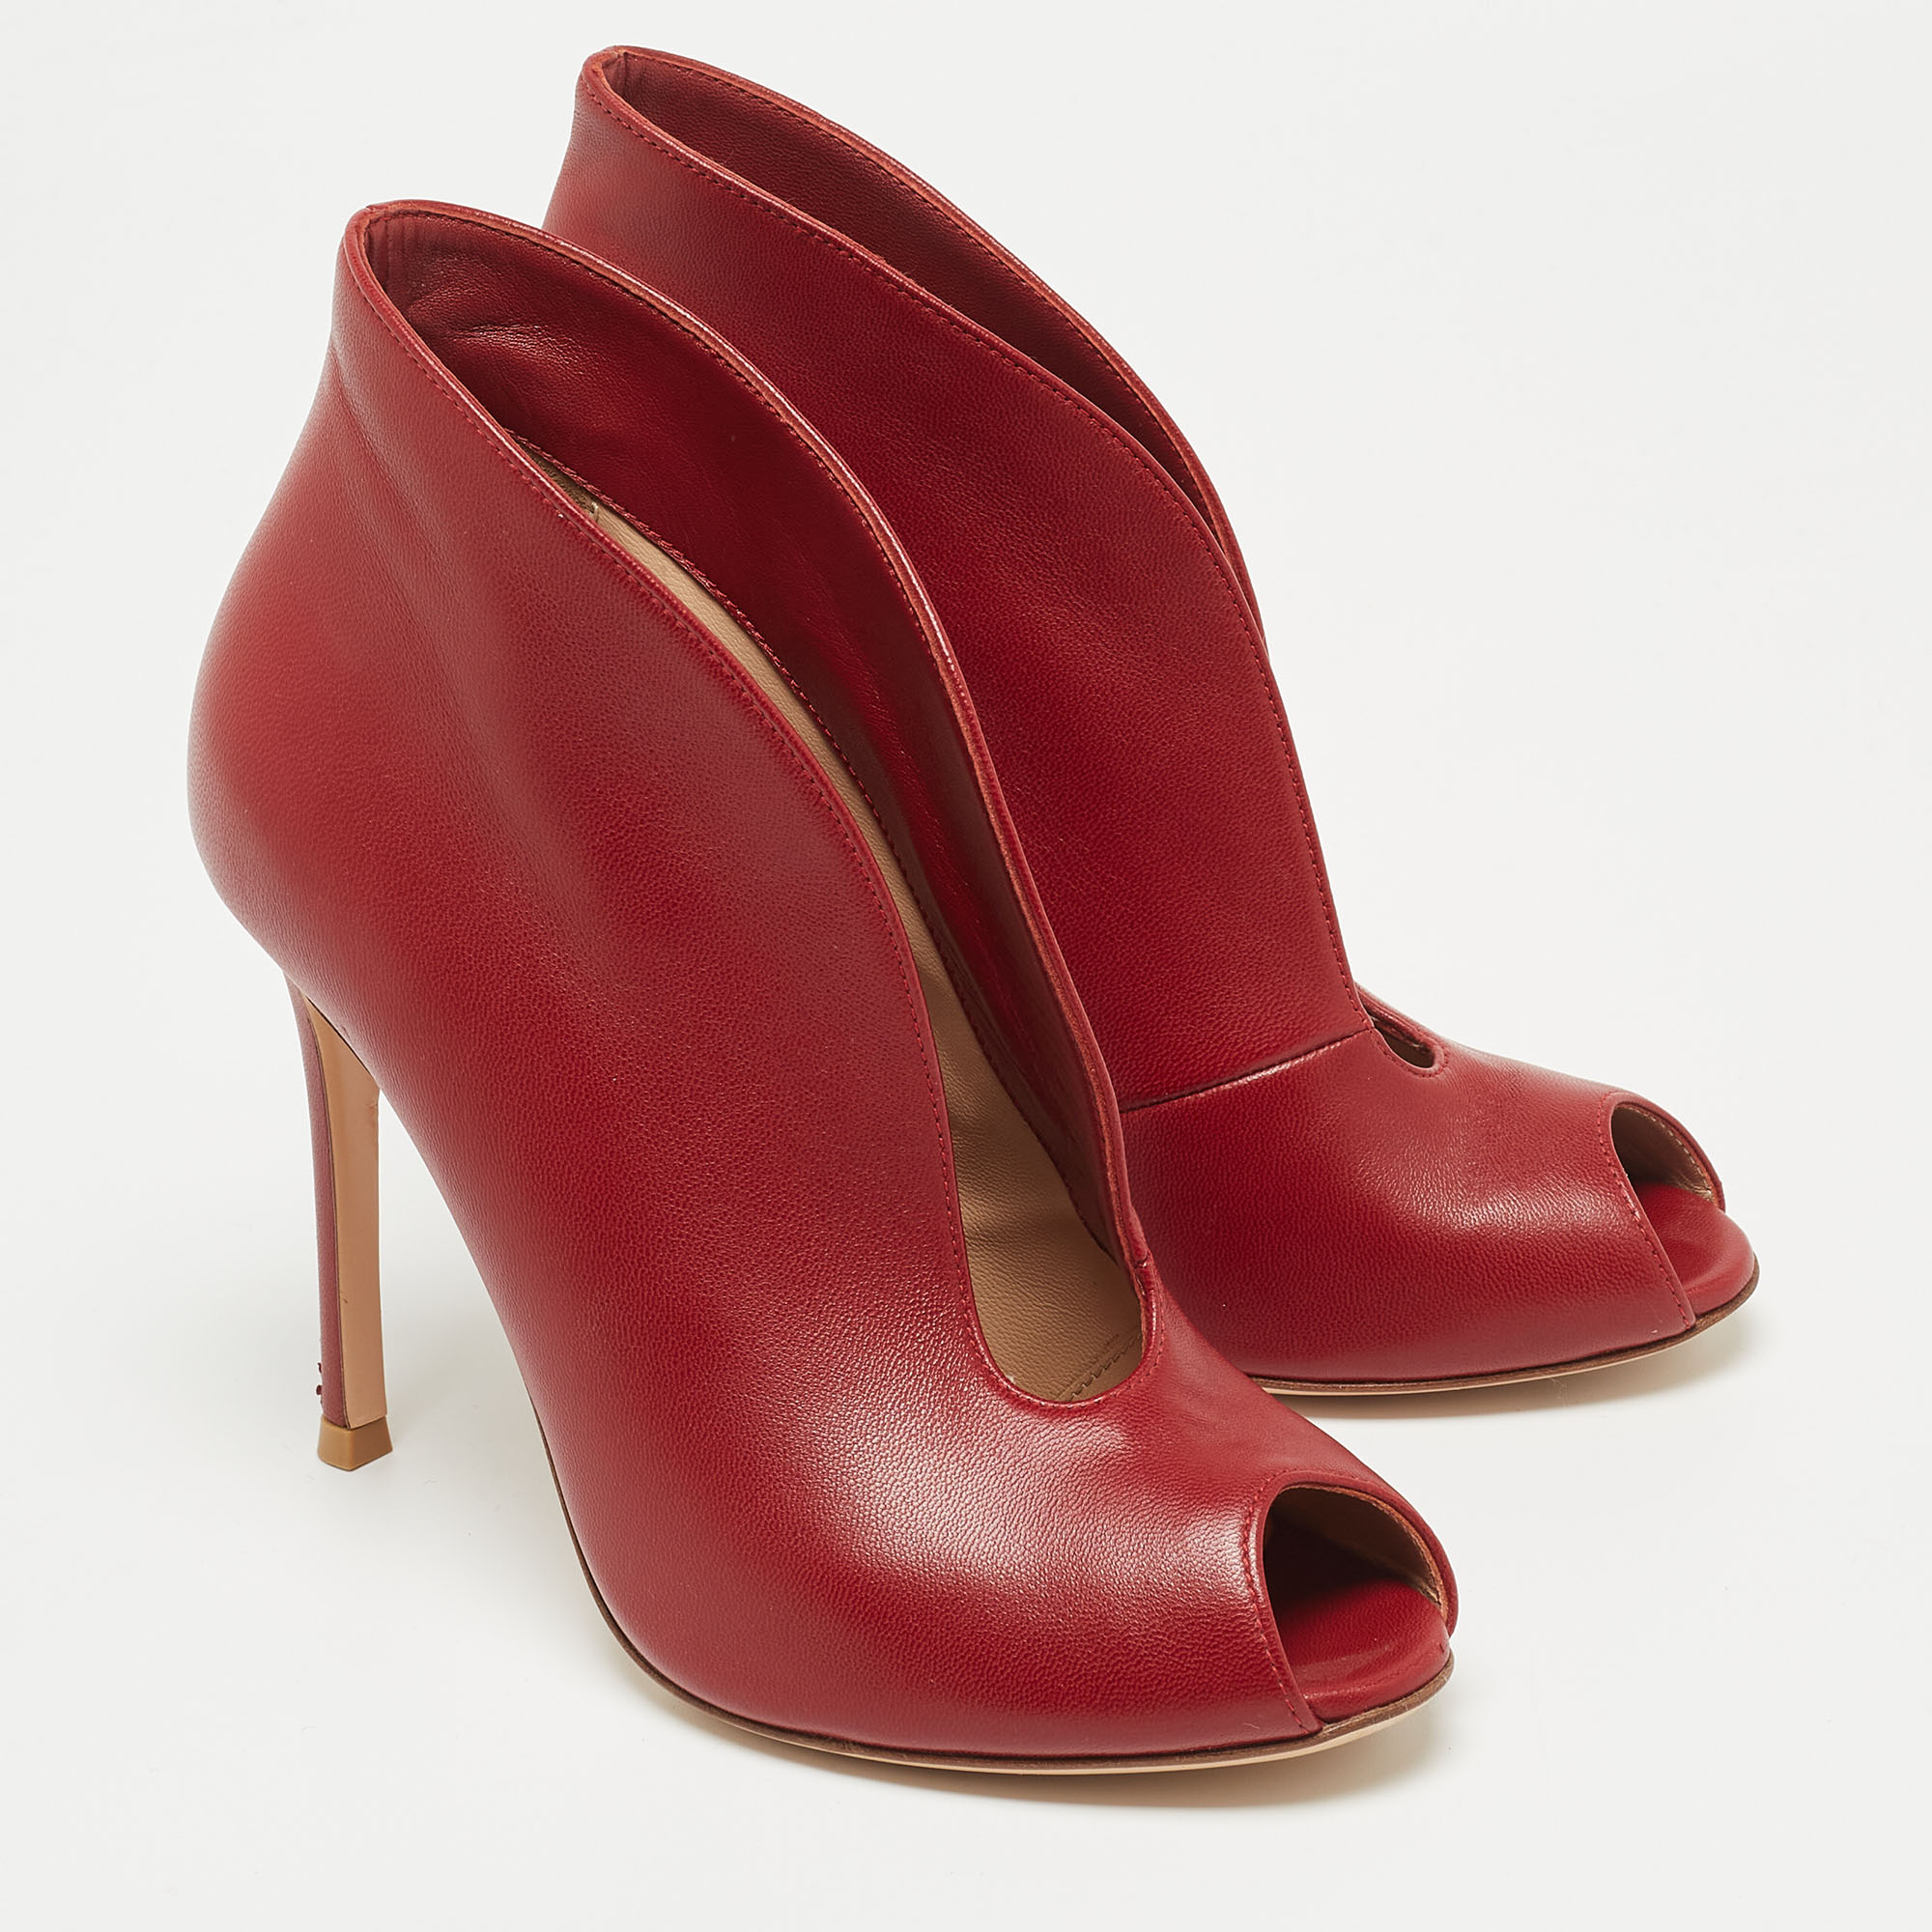 Gianvito Rossi Red Leather Vamp Peep Toe Ankle Booties Size 36